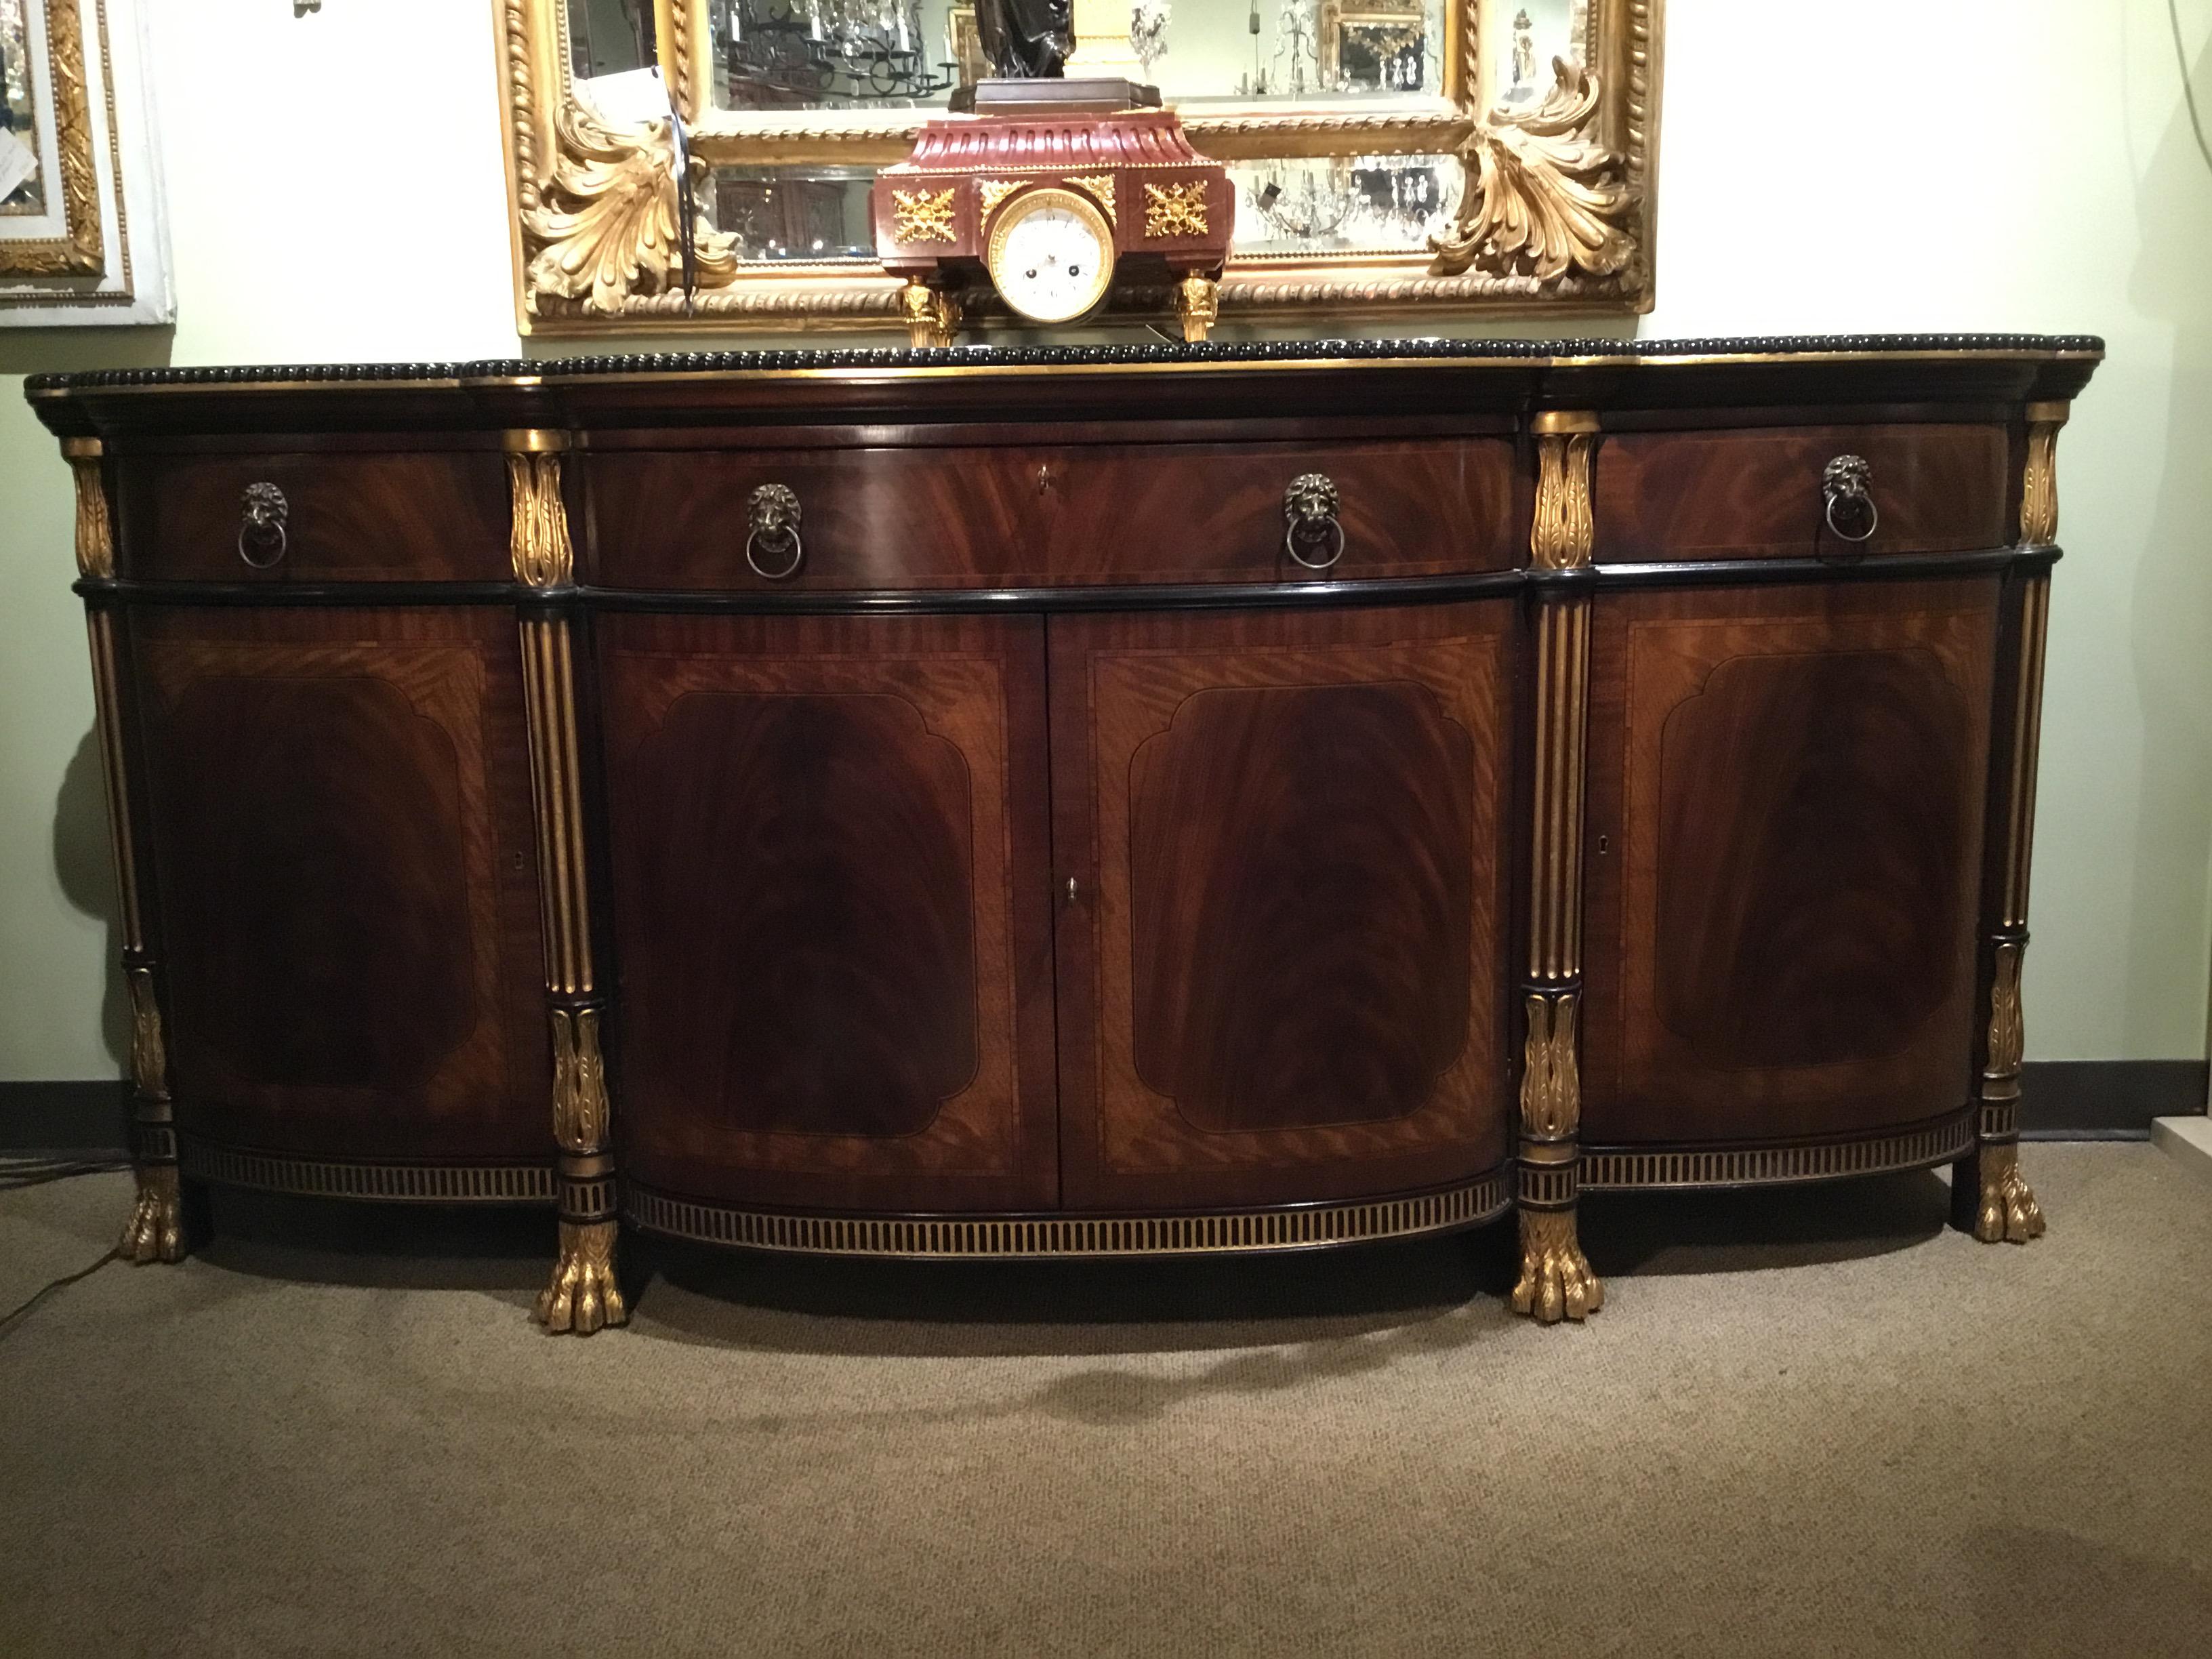 French Regency Style Buffet/Sideboard, Mahogany Woods and Veneers, Gilt Trim 2